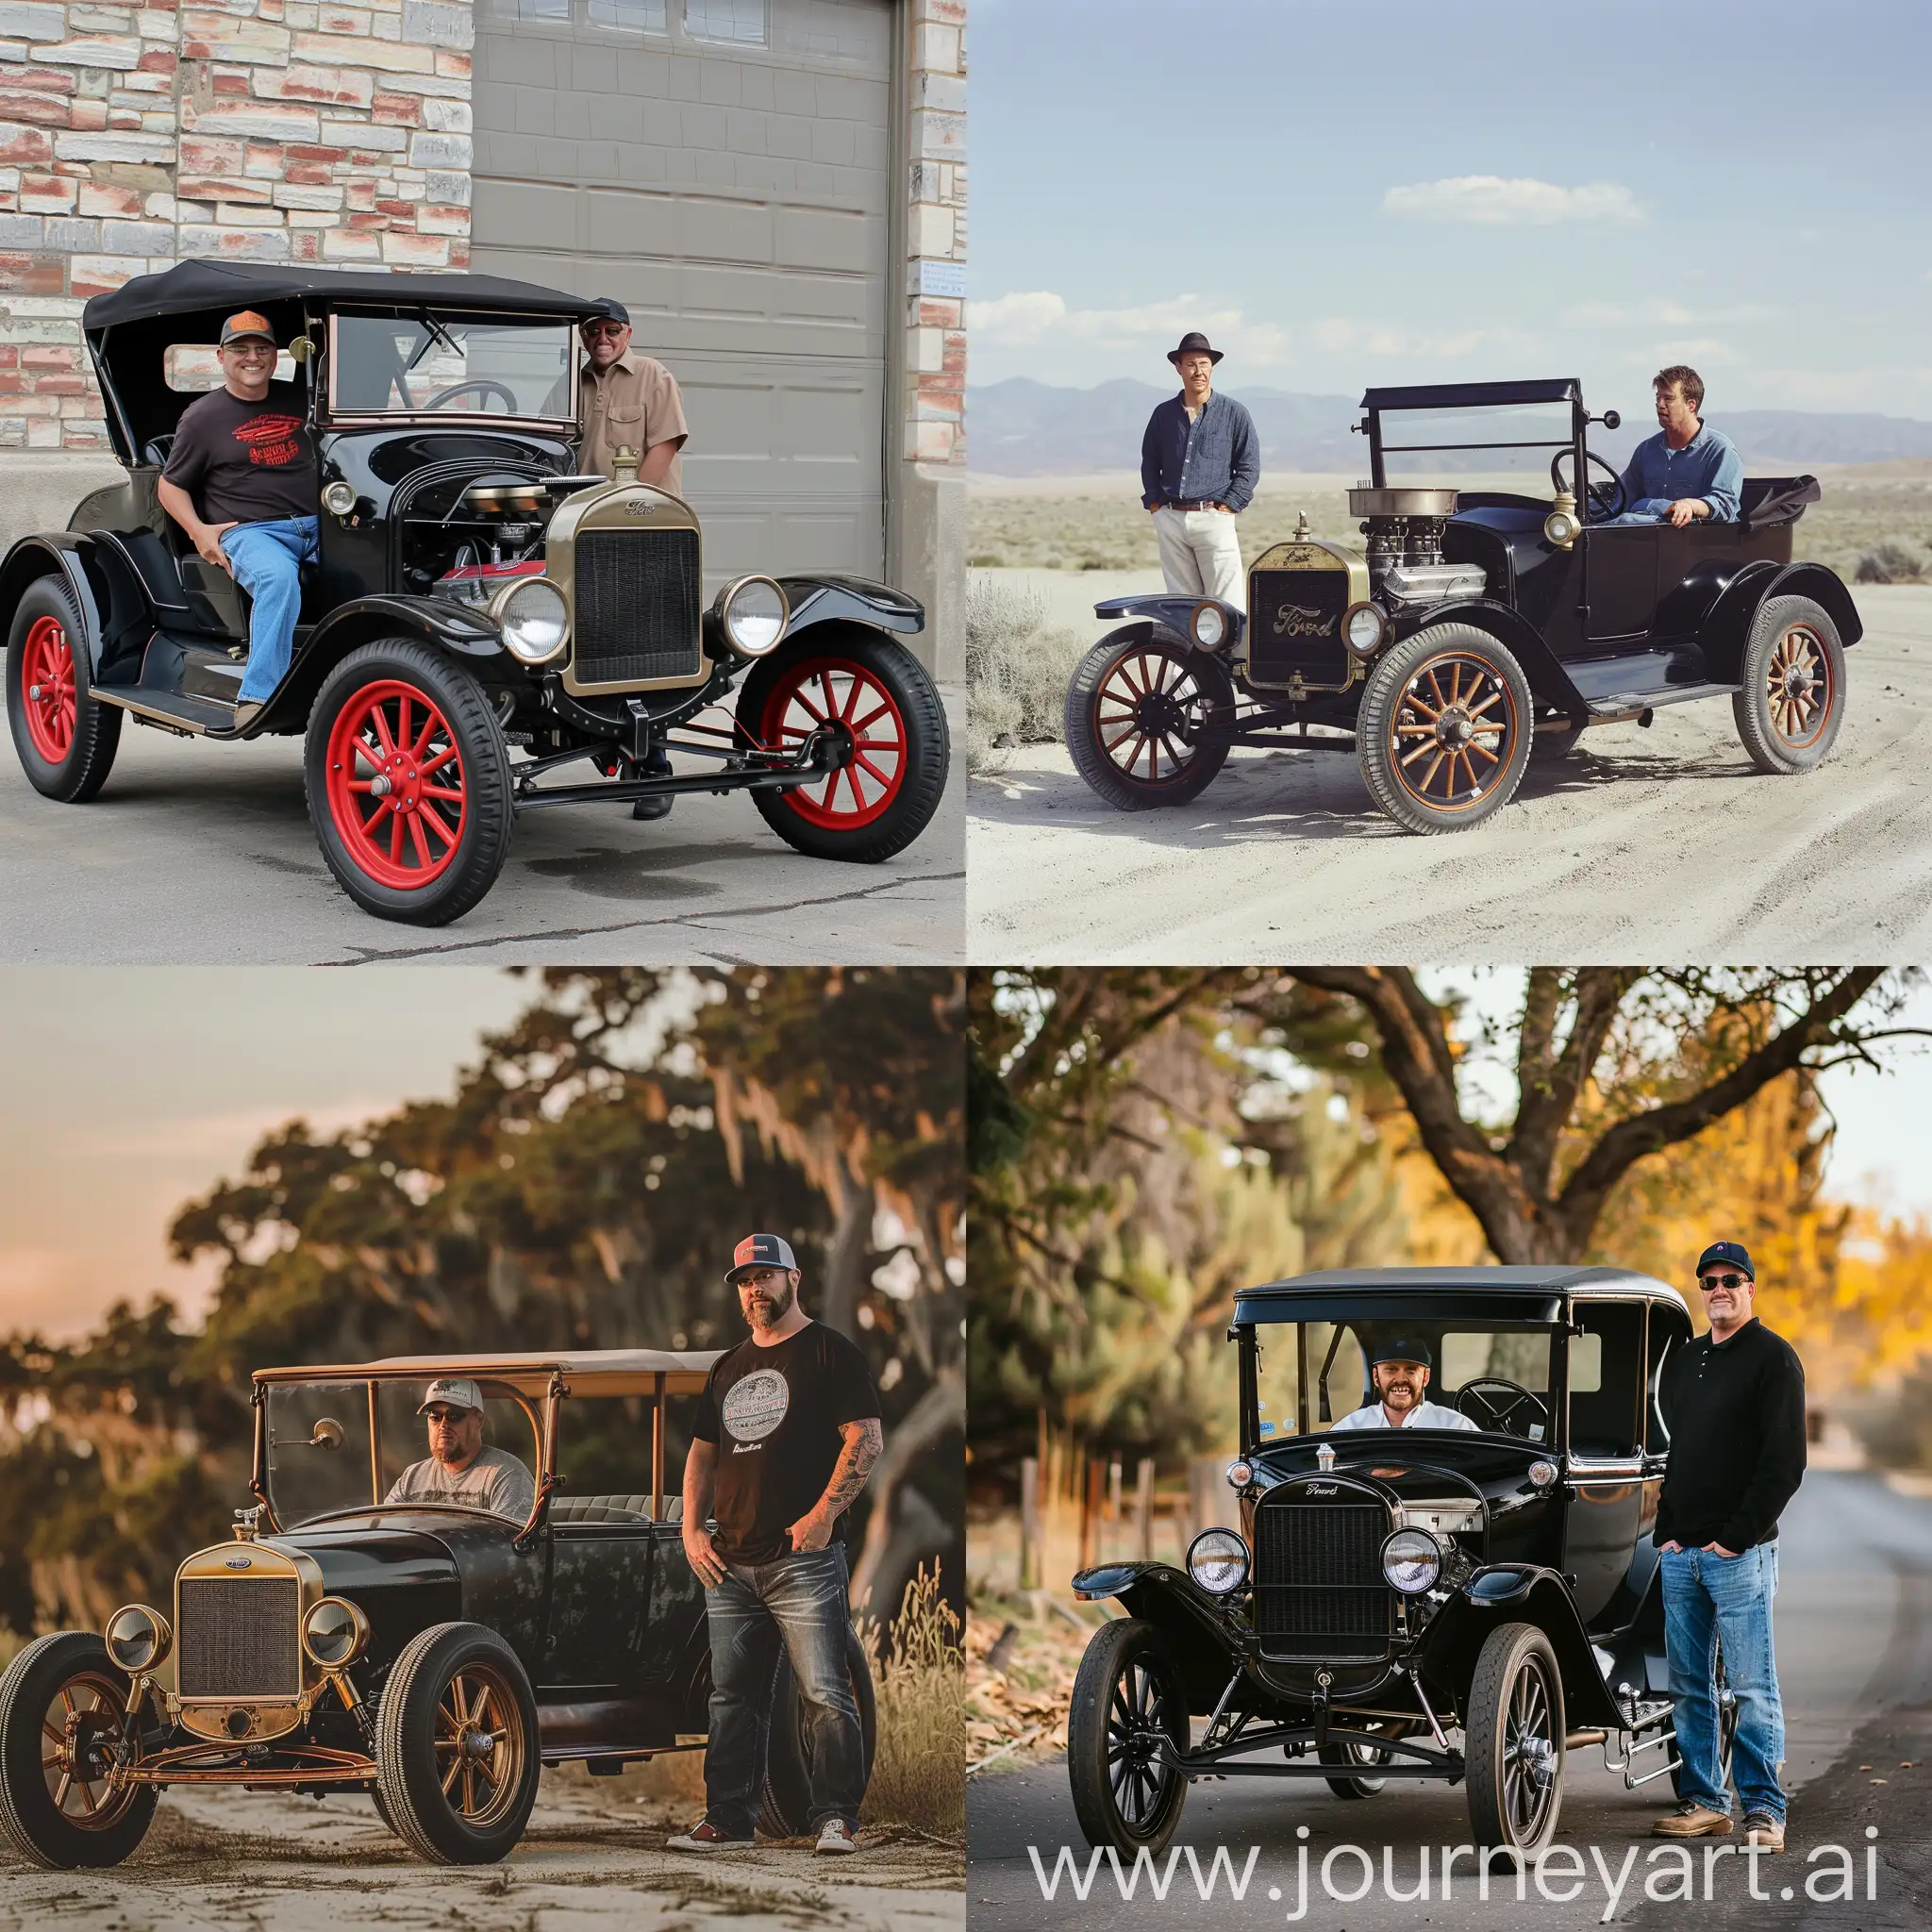 Vintage-ModelT-Hot-Rod-with-Man-Sitting-and-Standing-Realistic-High-Resolution-Image